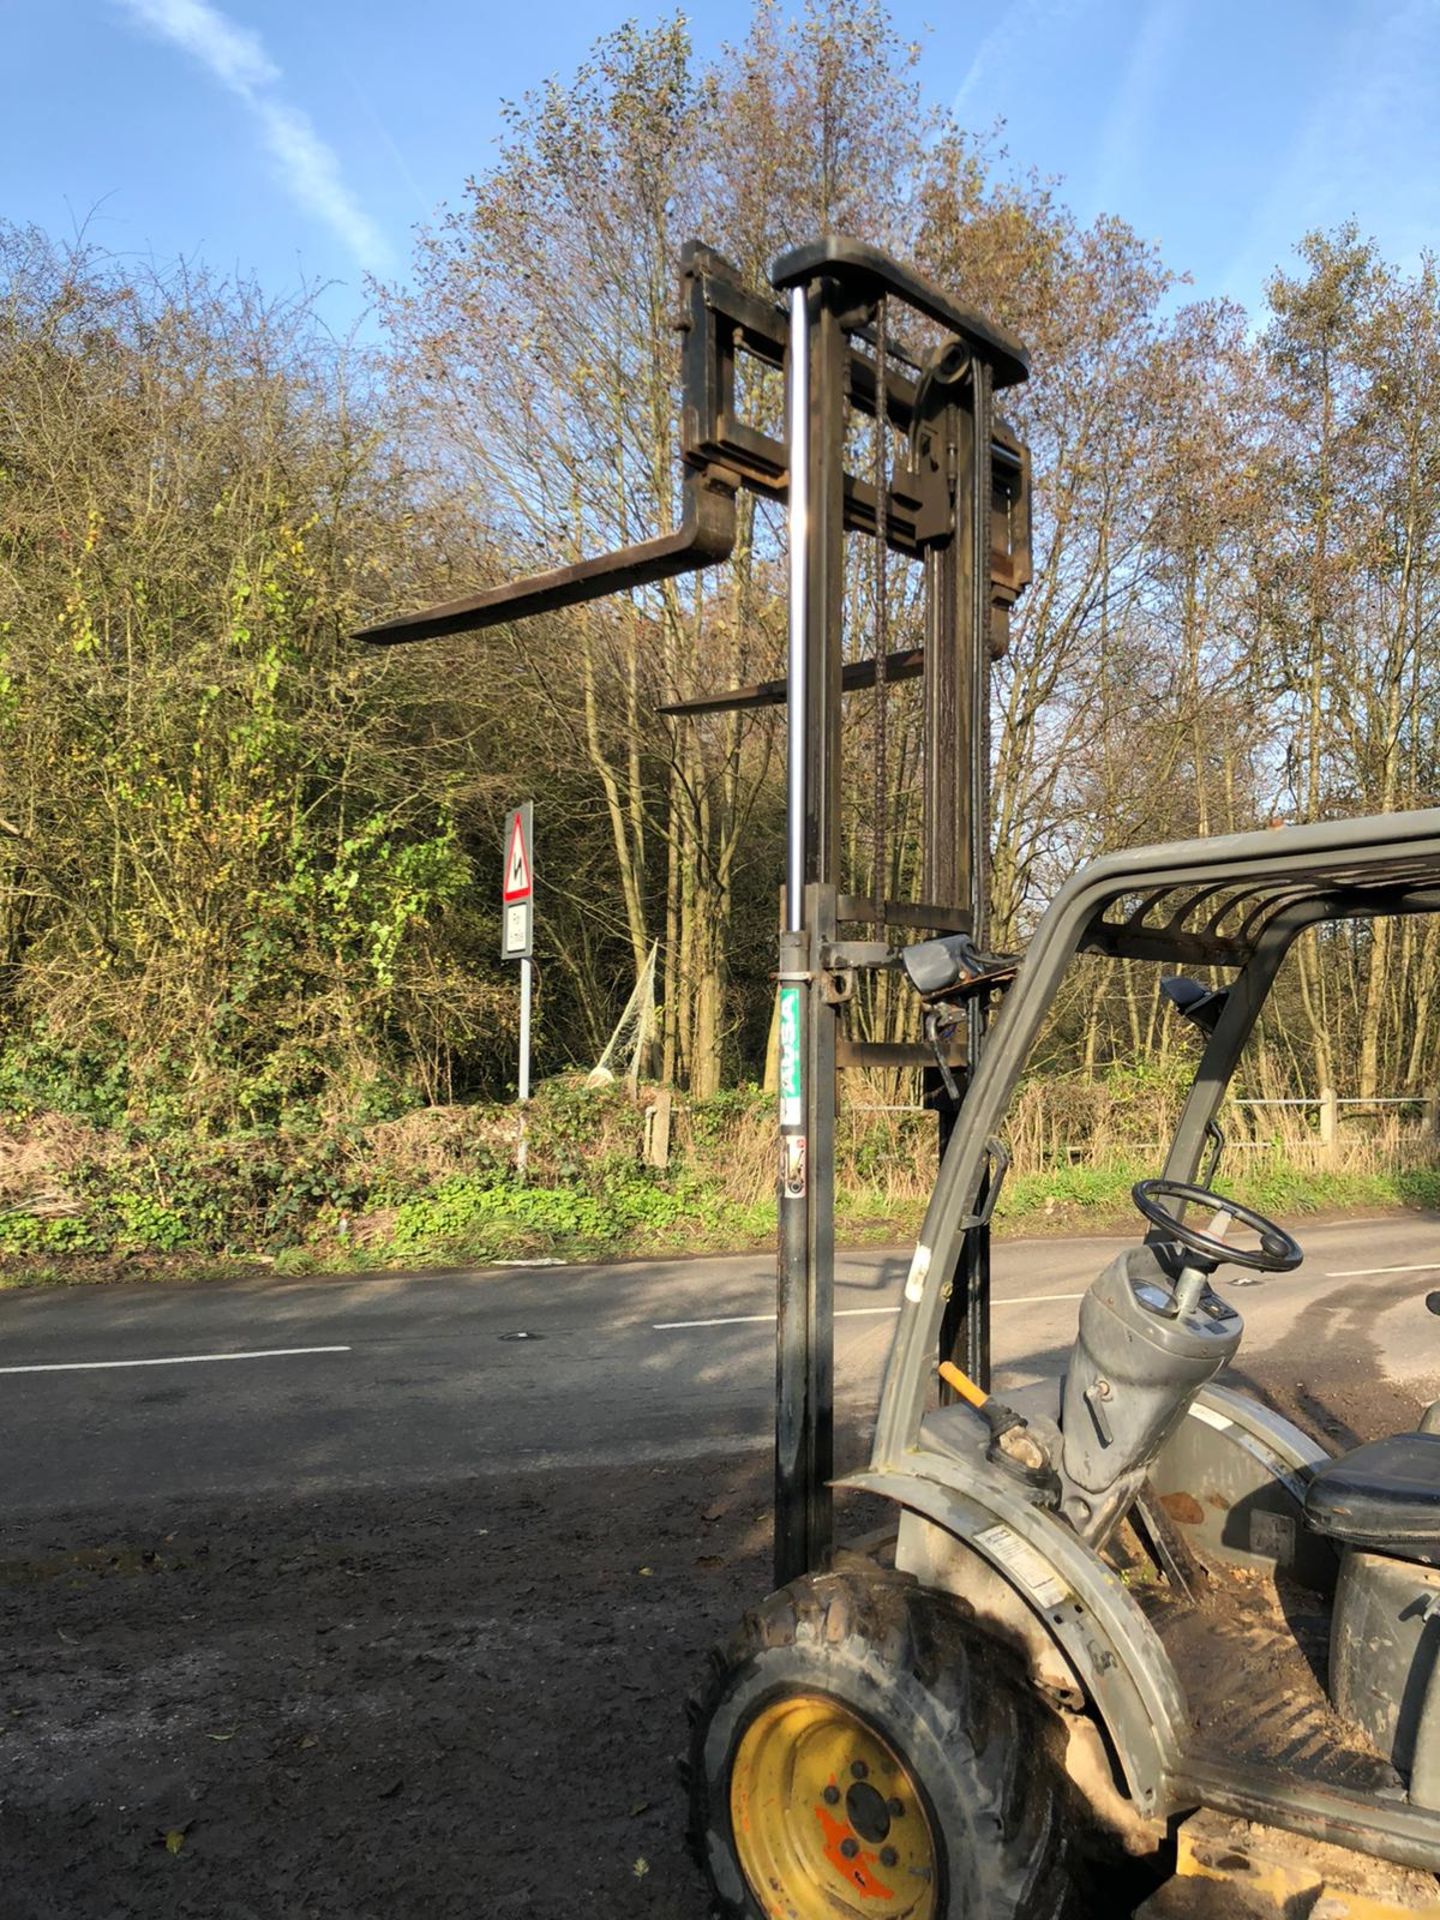 AUSA C150-H ROUGH TERRAIN FORKLIFT, YEAR 2006, RUNS, WORKS AND LIFTS *PLUS VAT* - Image 2 of 6